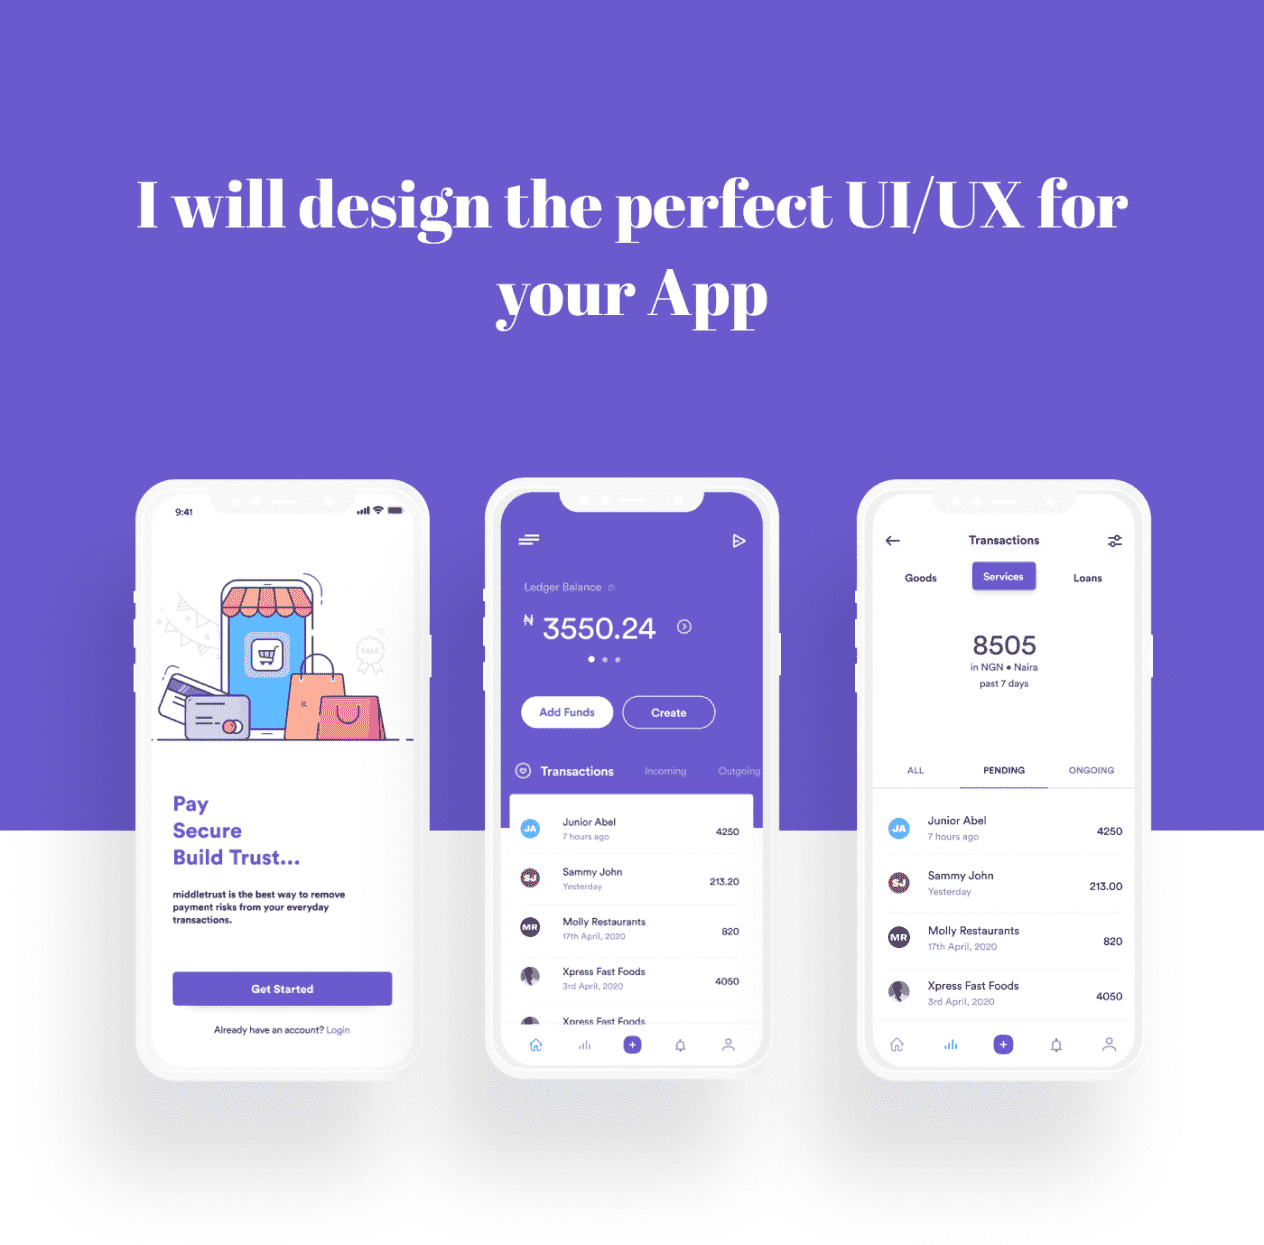 I will design the perfect UI for your app